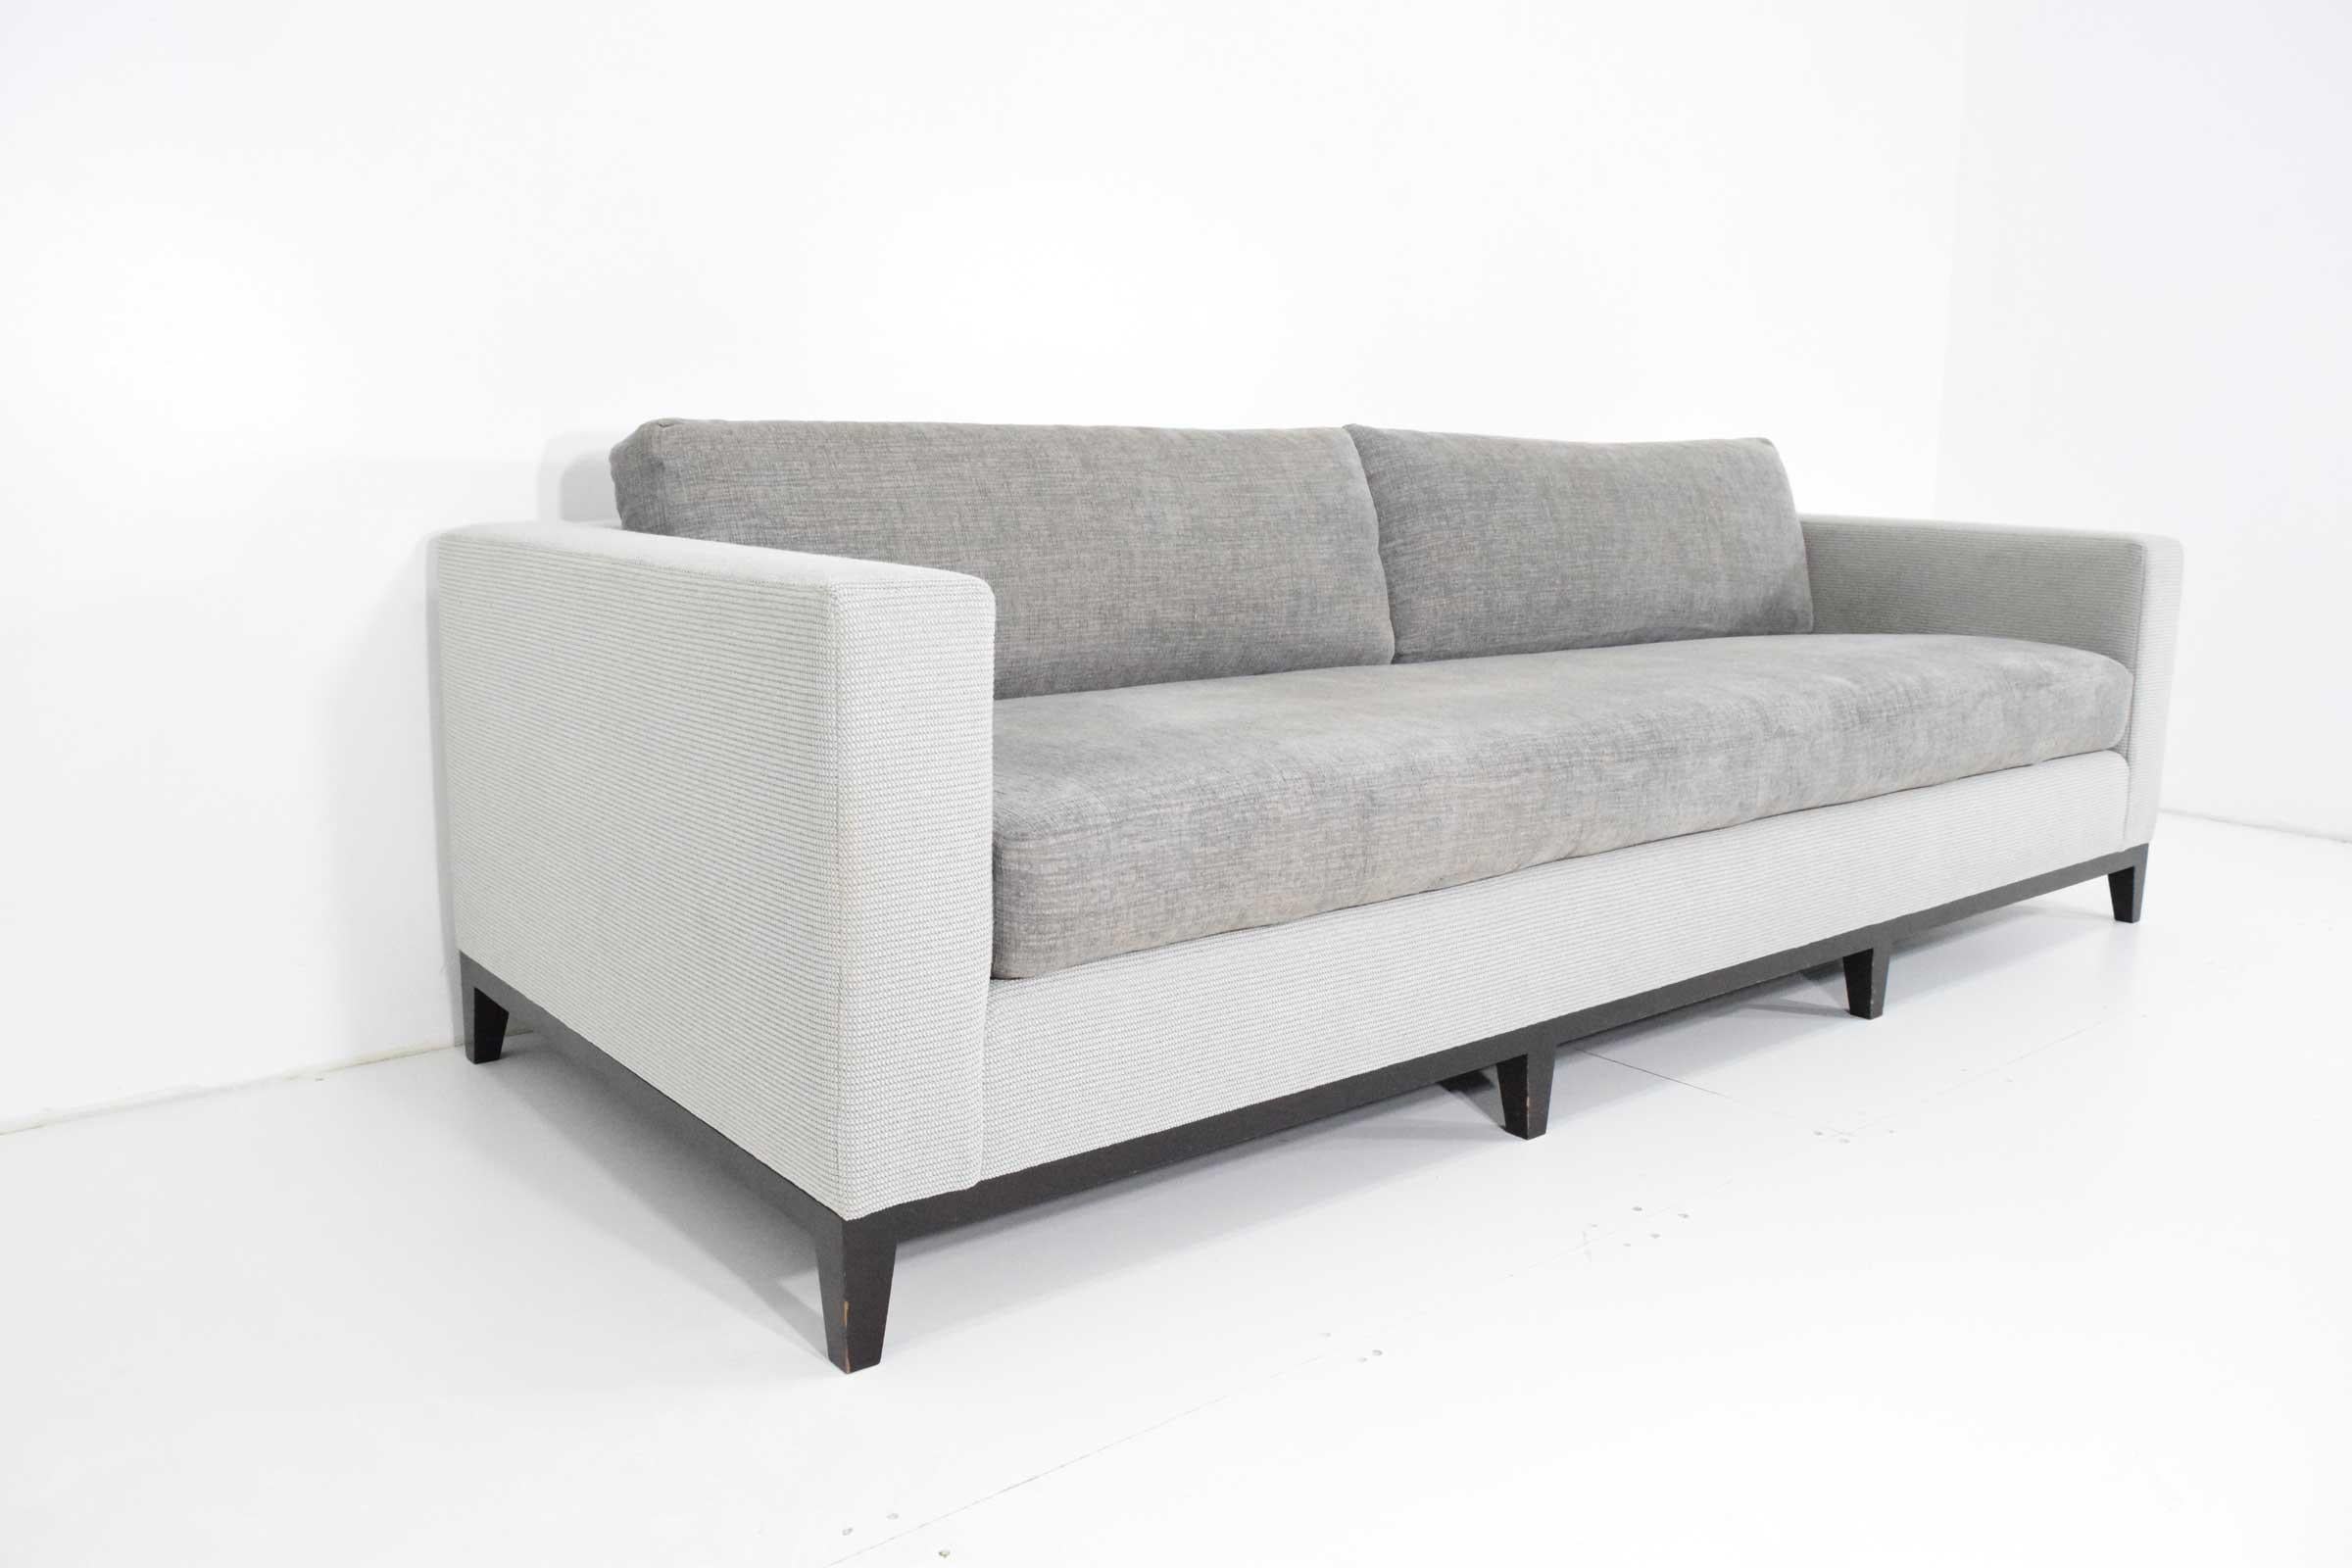 A beautiful clean lined sofa by Christian Liaigre for Holly Hunt. Extremely well constructed and of the highest quality. Sofa would benefit with new upholstery which we recommend. Espresso stained wood base.